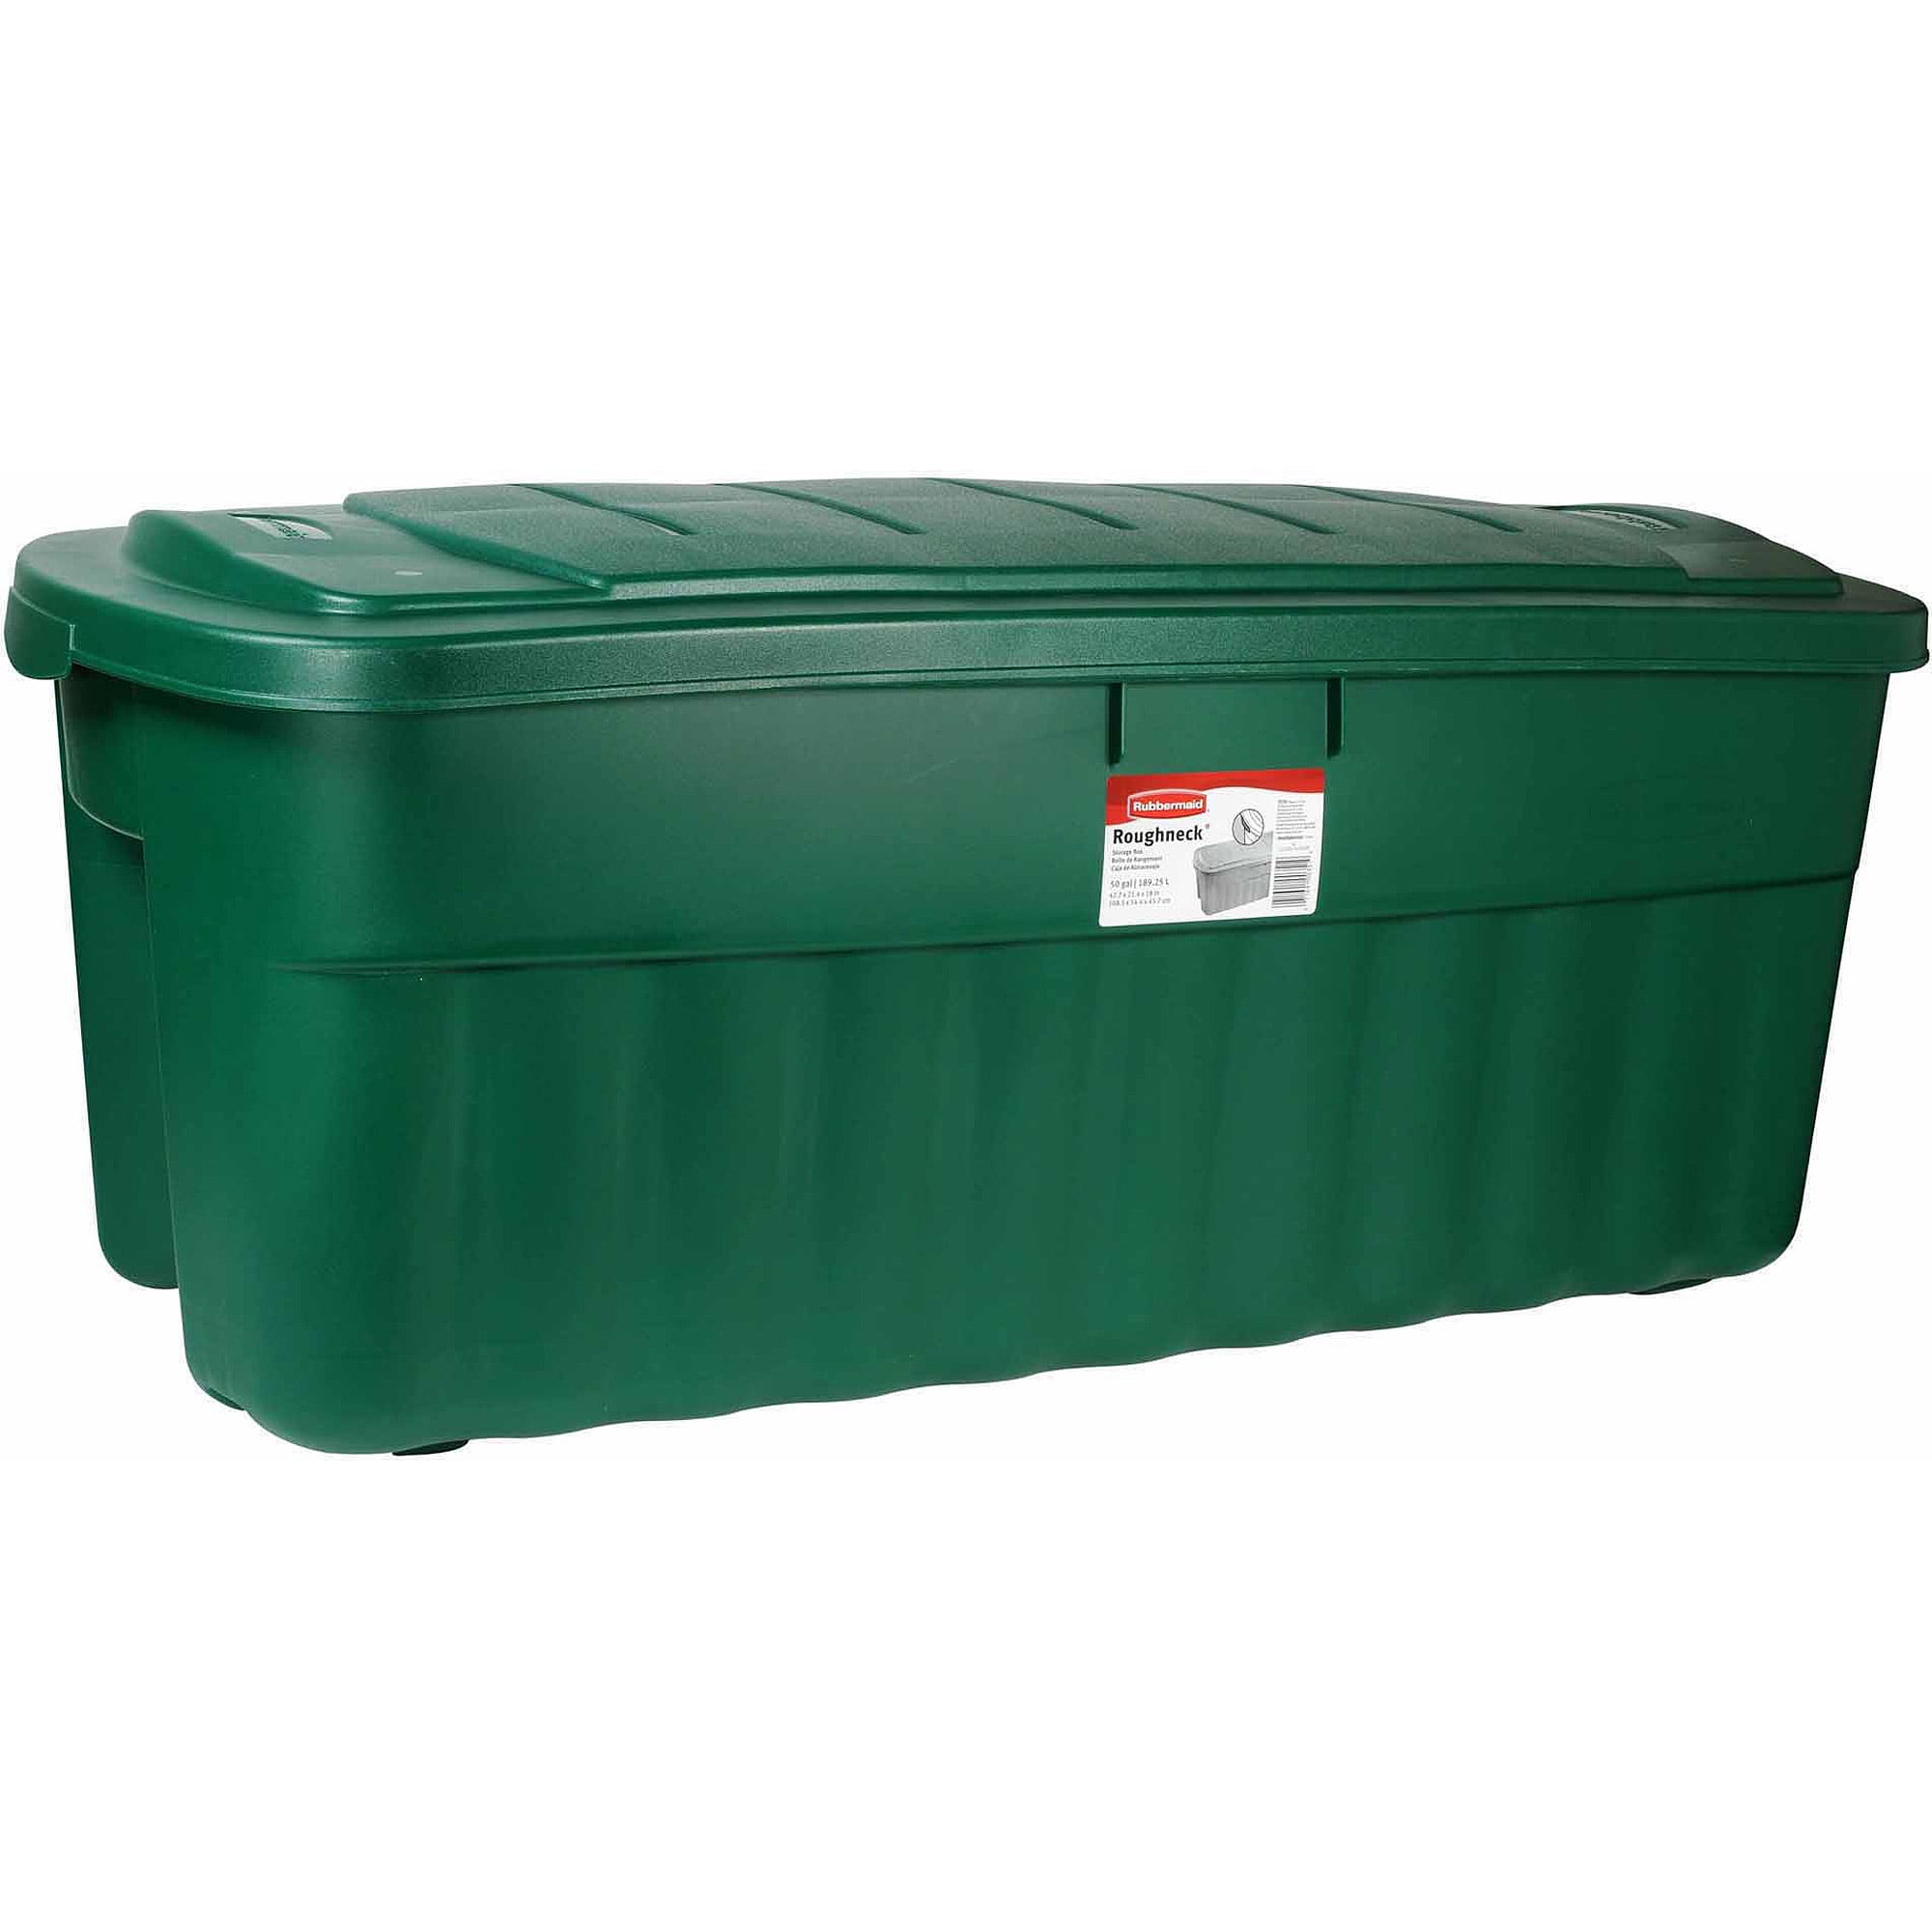  Rubbermaid Roughneck️ 50 Gallon Holiday Storage Totes, Perfect  Organization Bins for Holiday Décor, Durable, Reusable and Stackable Large Plastic  Bins, Festive Green Base/Red Lid, Pack of 2 : Tools & Home